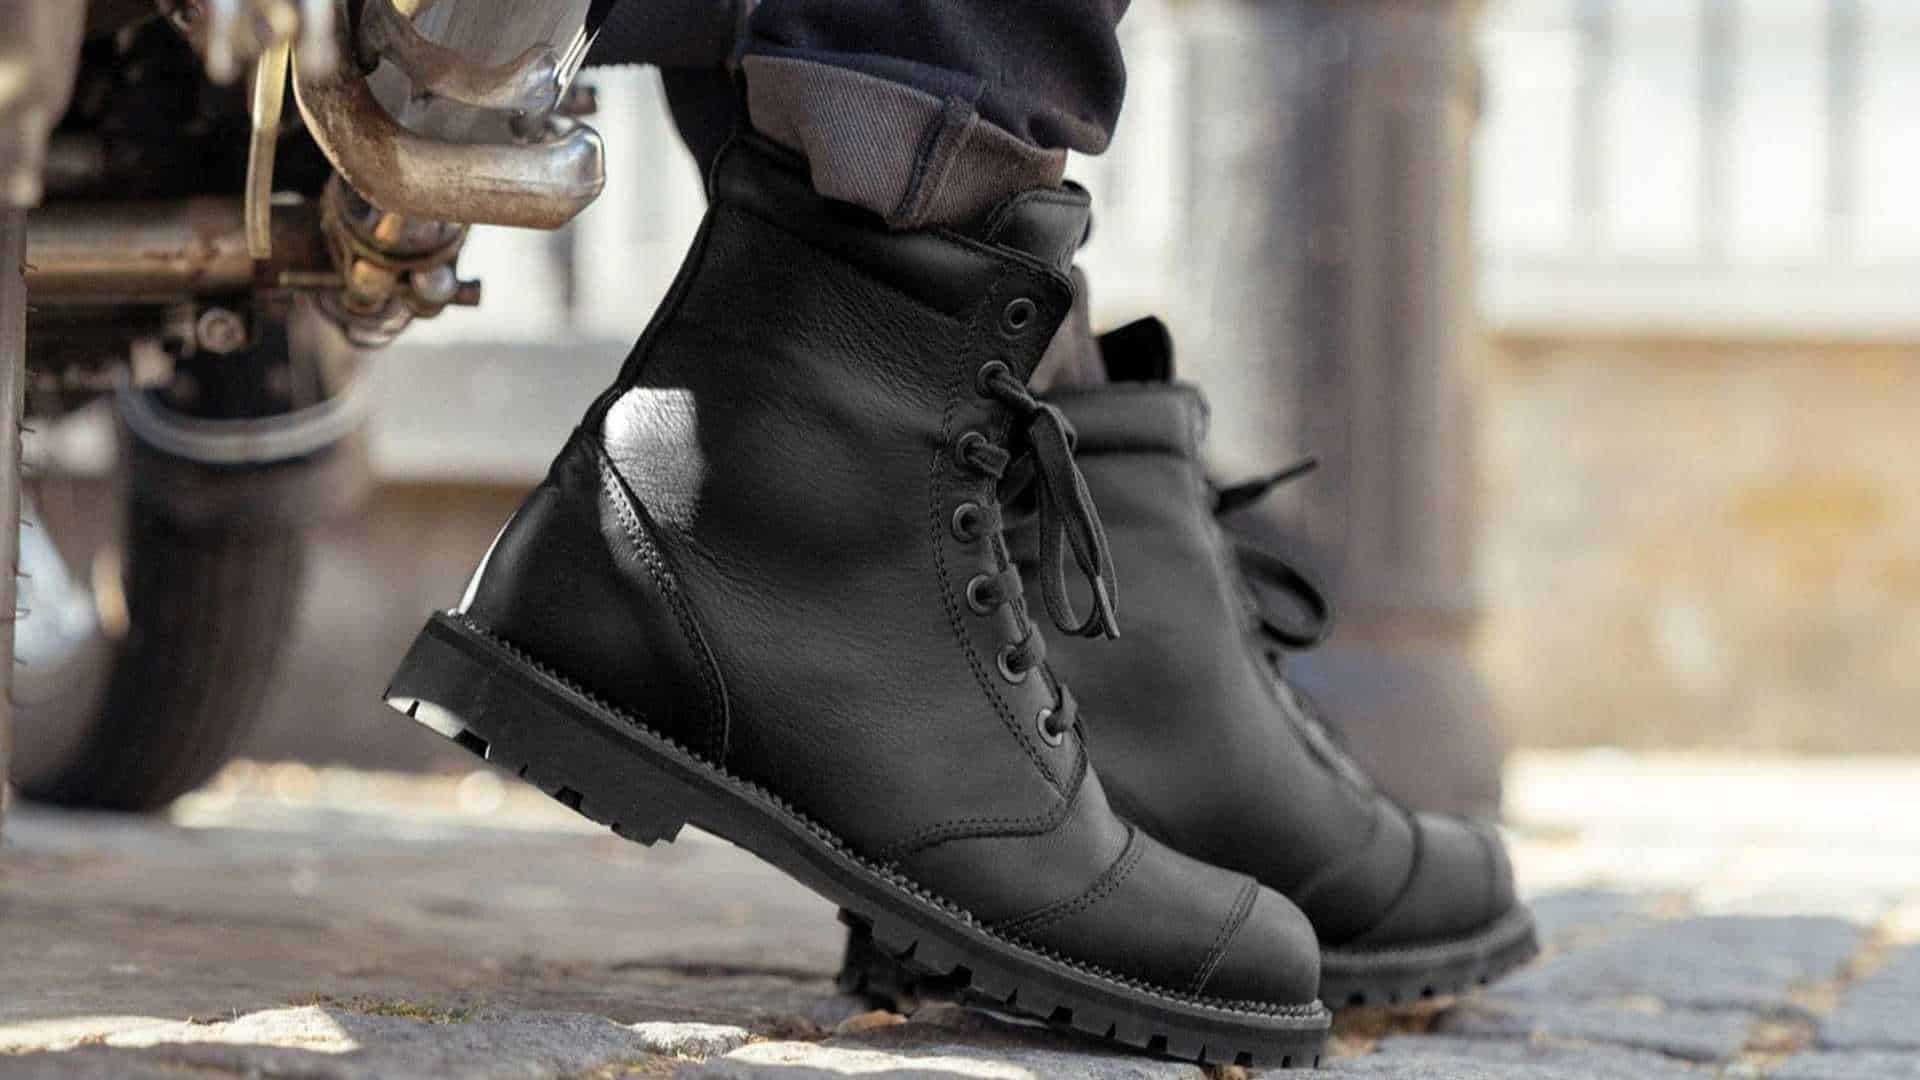 Motorcycle Boots for Walking